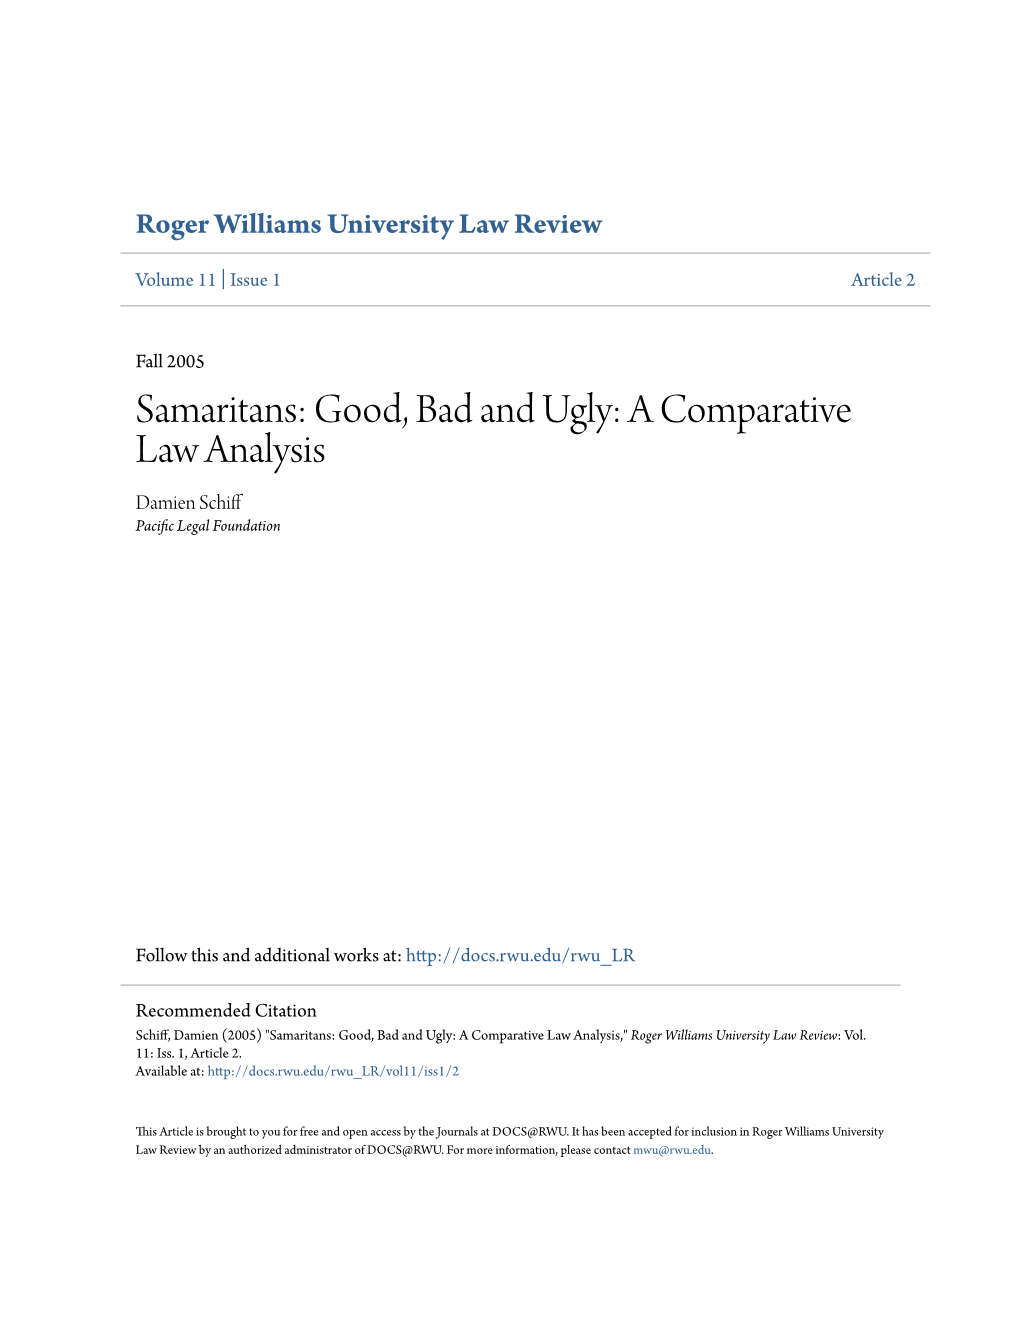 Samaritans: Good, Bad and Ugly: a Comparative Law Analysis Damien Schiff Pacific Legal Foundation